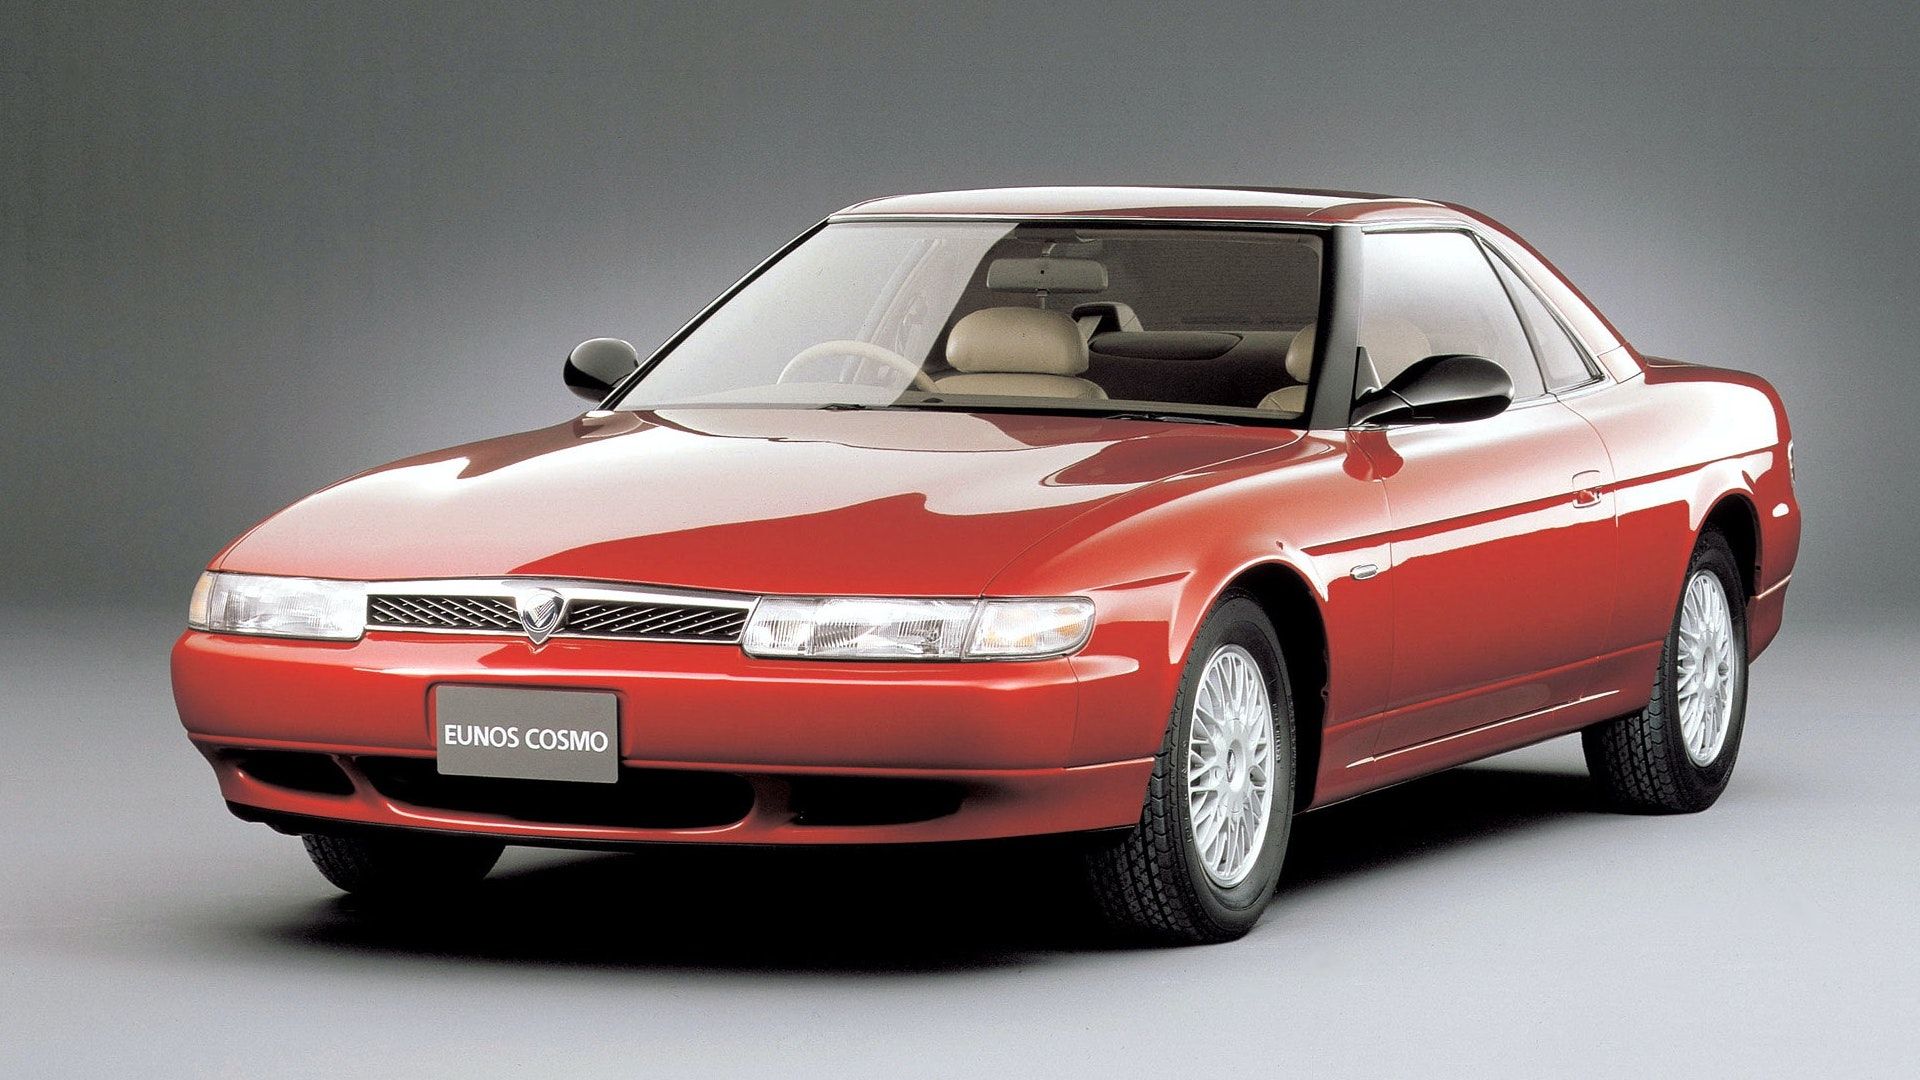 inside-the-holy-grail-of-rotary-cars-the-90s-eunos-cosmo